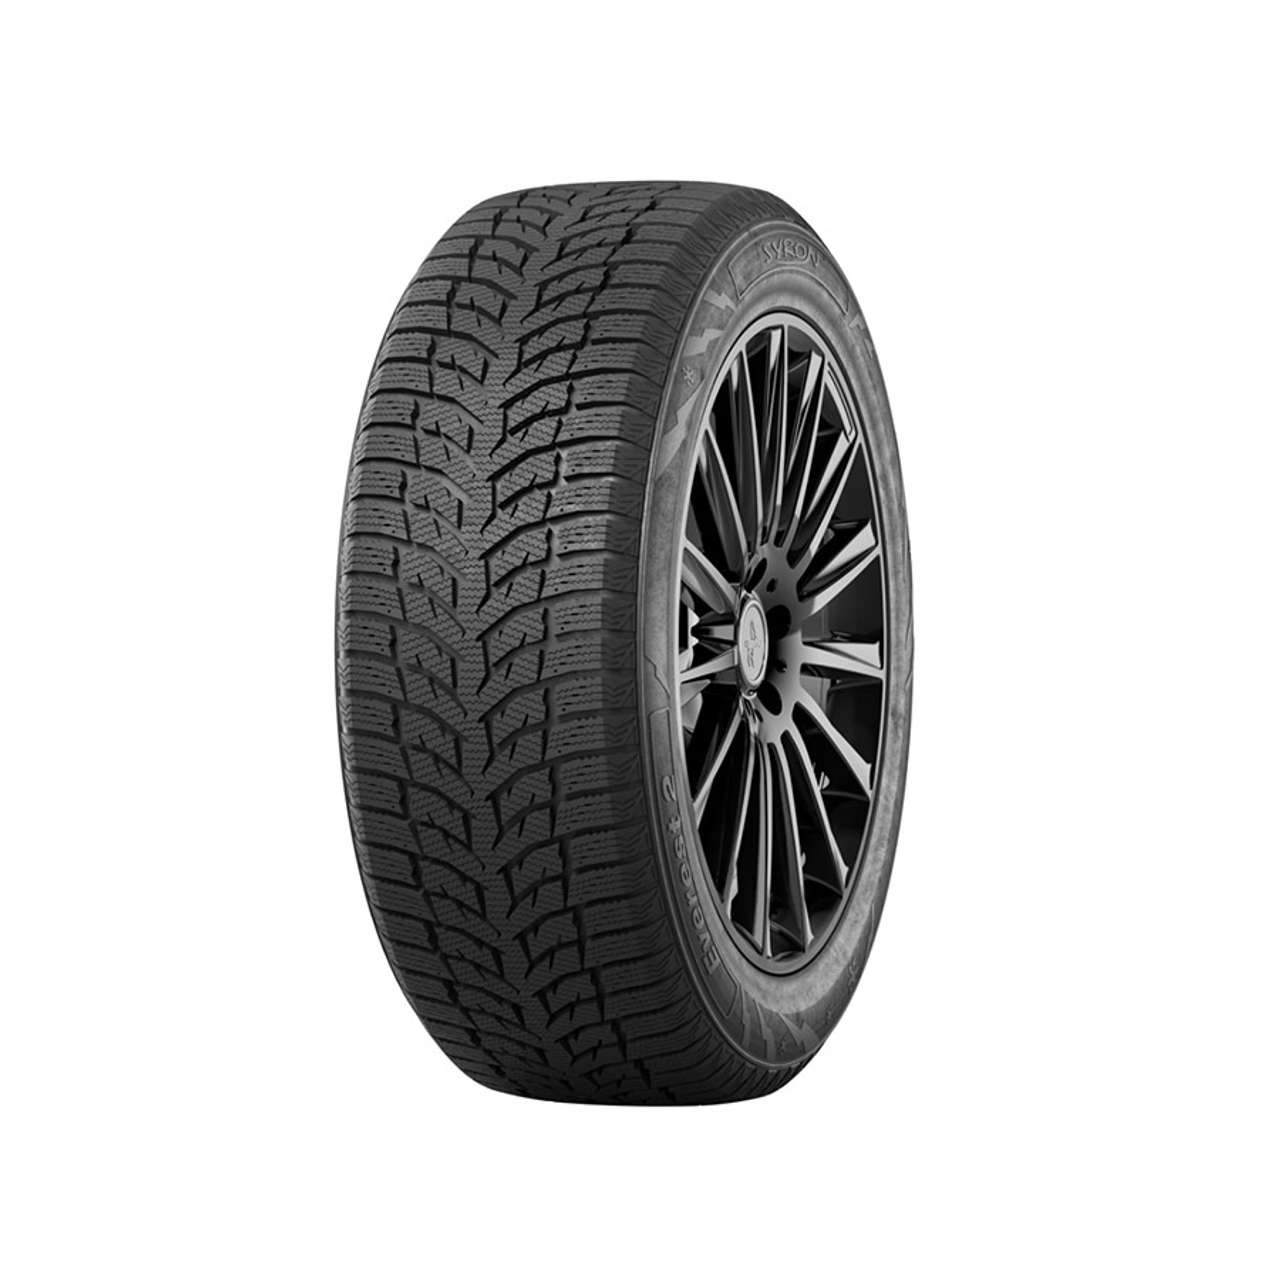 SYRON EVEREST 2 225/50R17 94H BSW